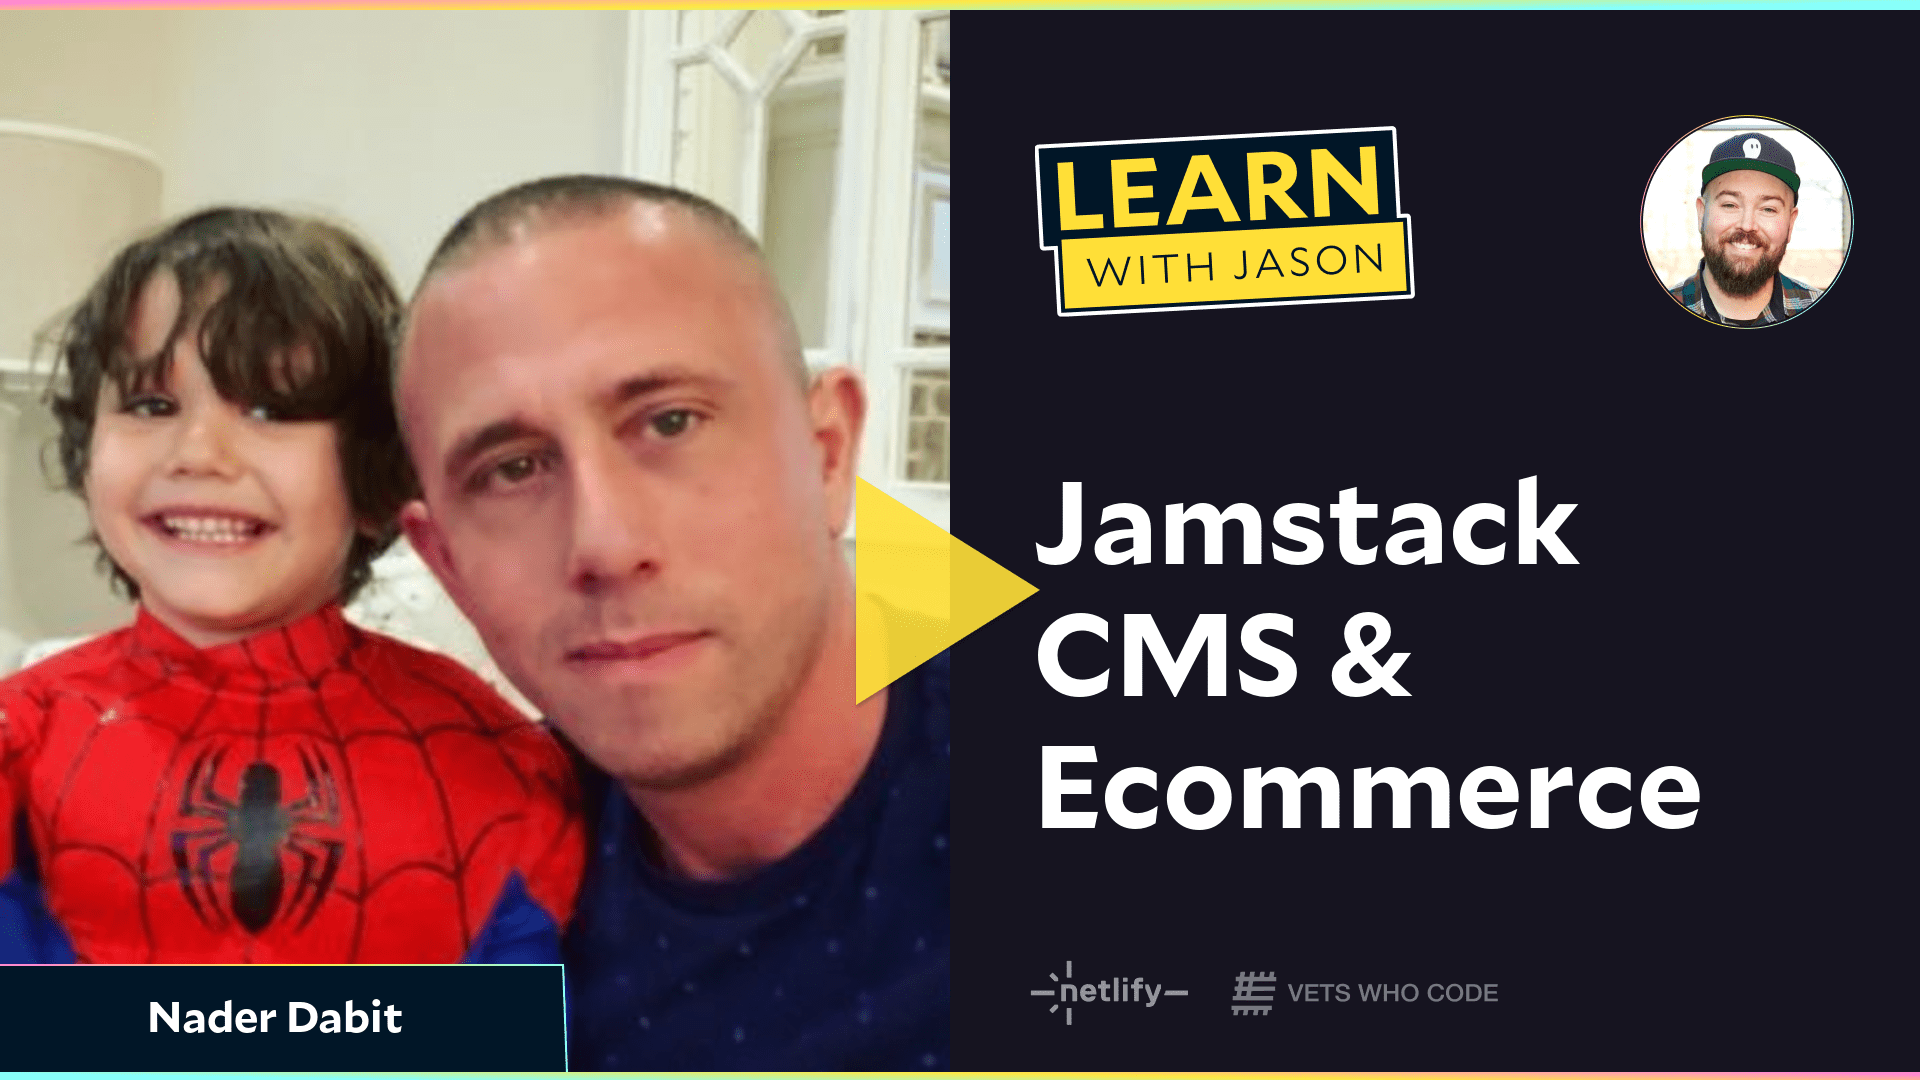 Jamstack CMS & Ecommerce (with Nader Dabit)